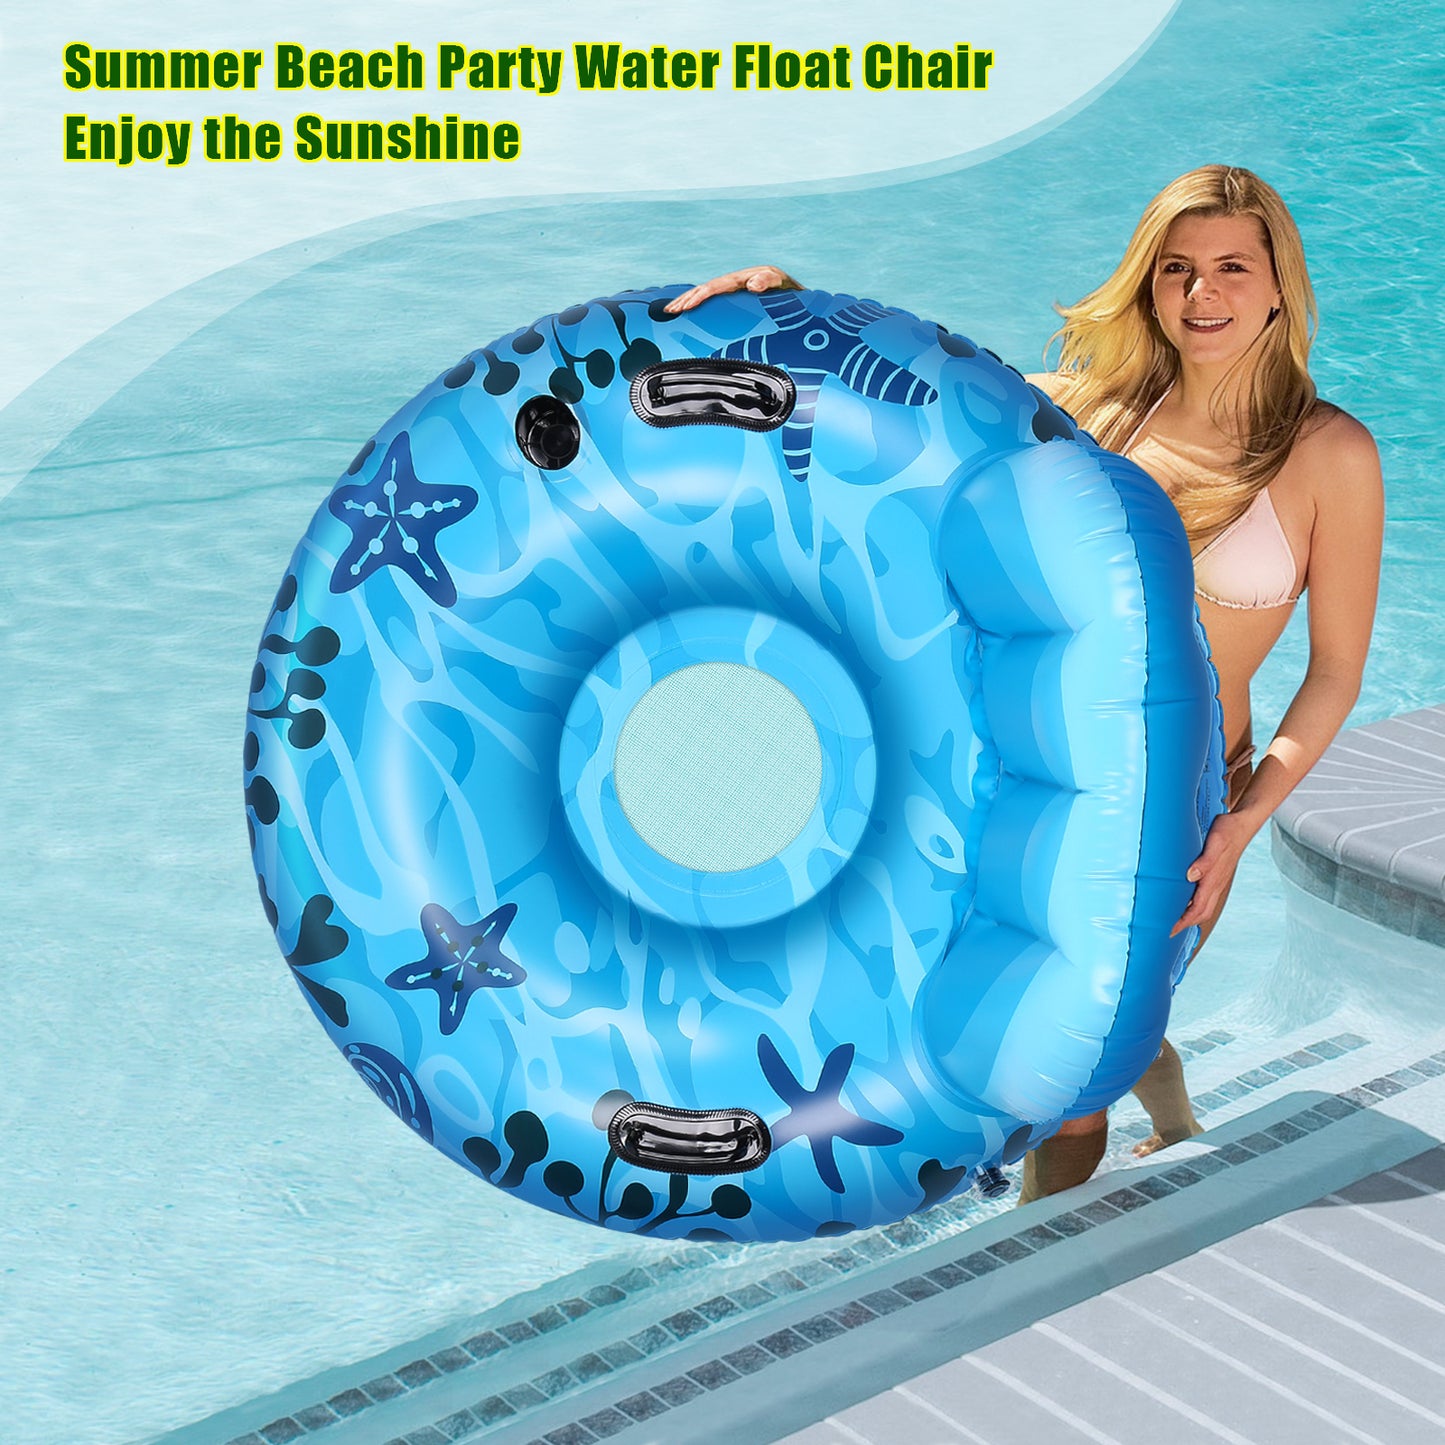 CAMULAND Inflatable Lounger Pool Float with a Rubber Handle and a Drink Holder